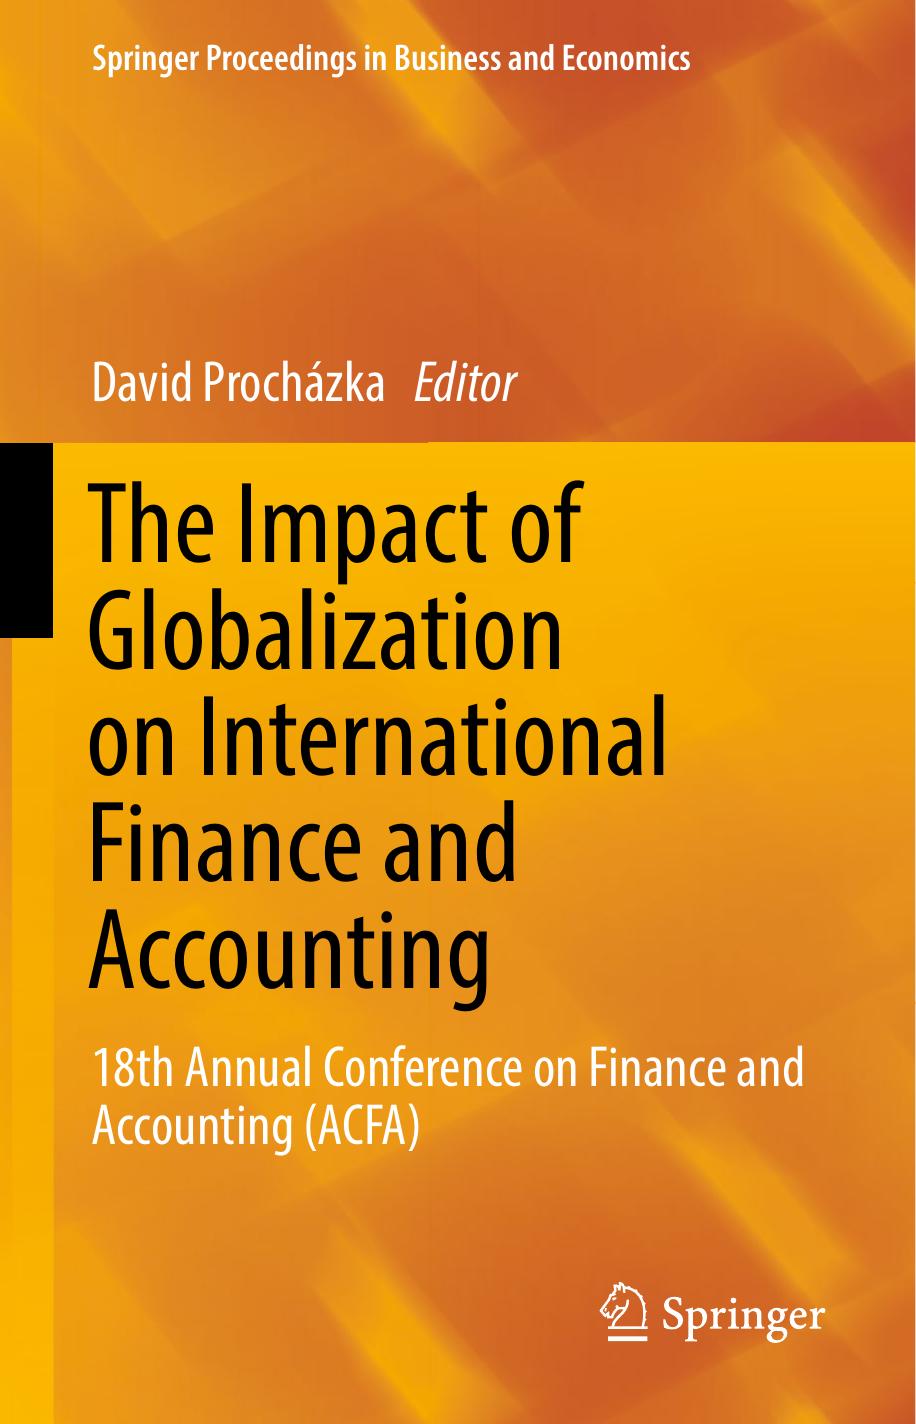 The Impact of Globalization on International Finance and Accounting 2018.pdf